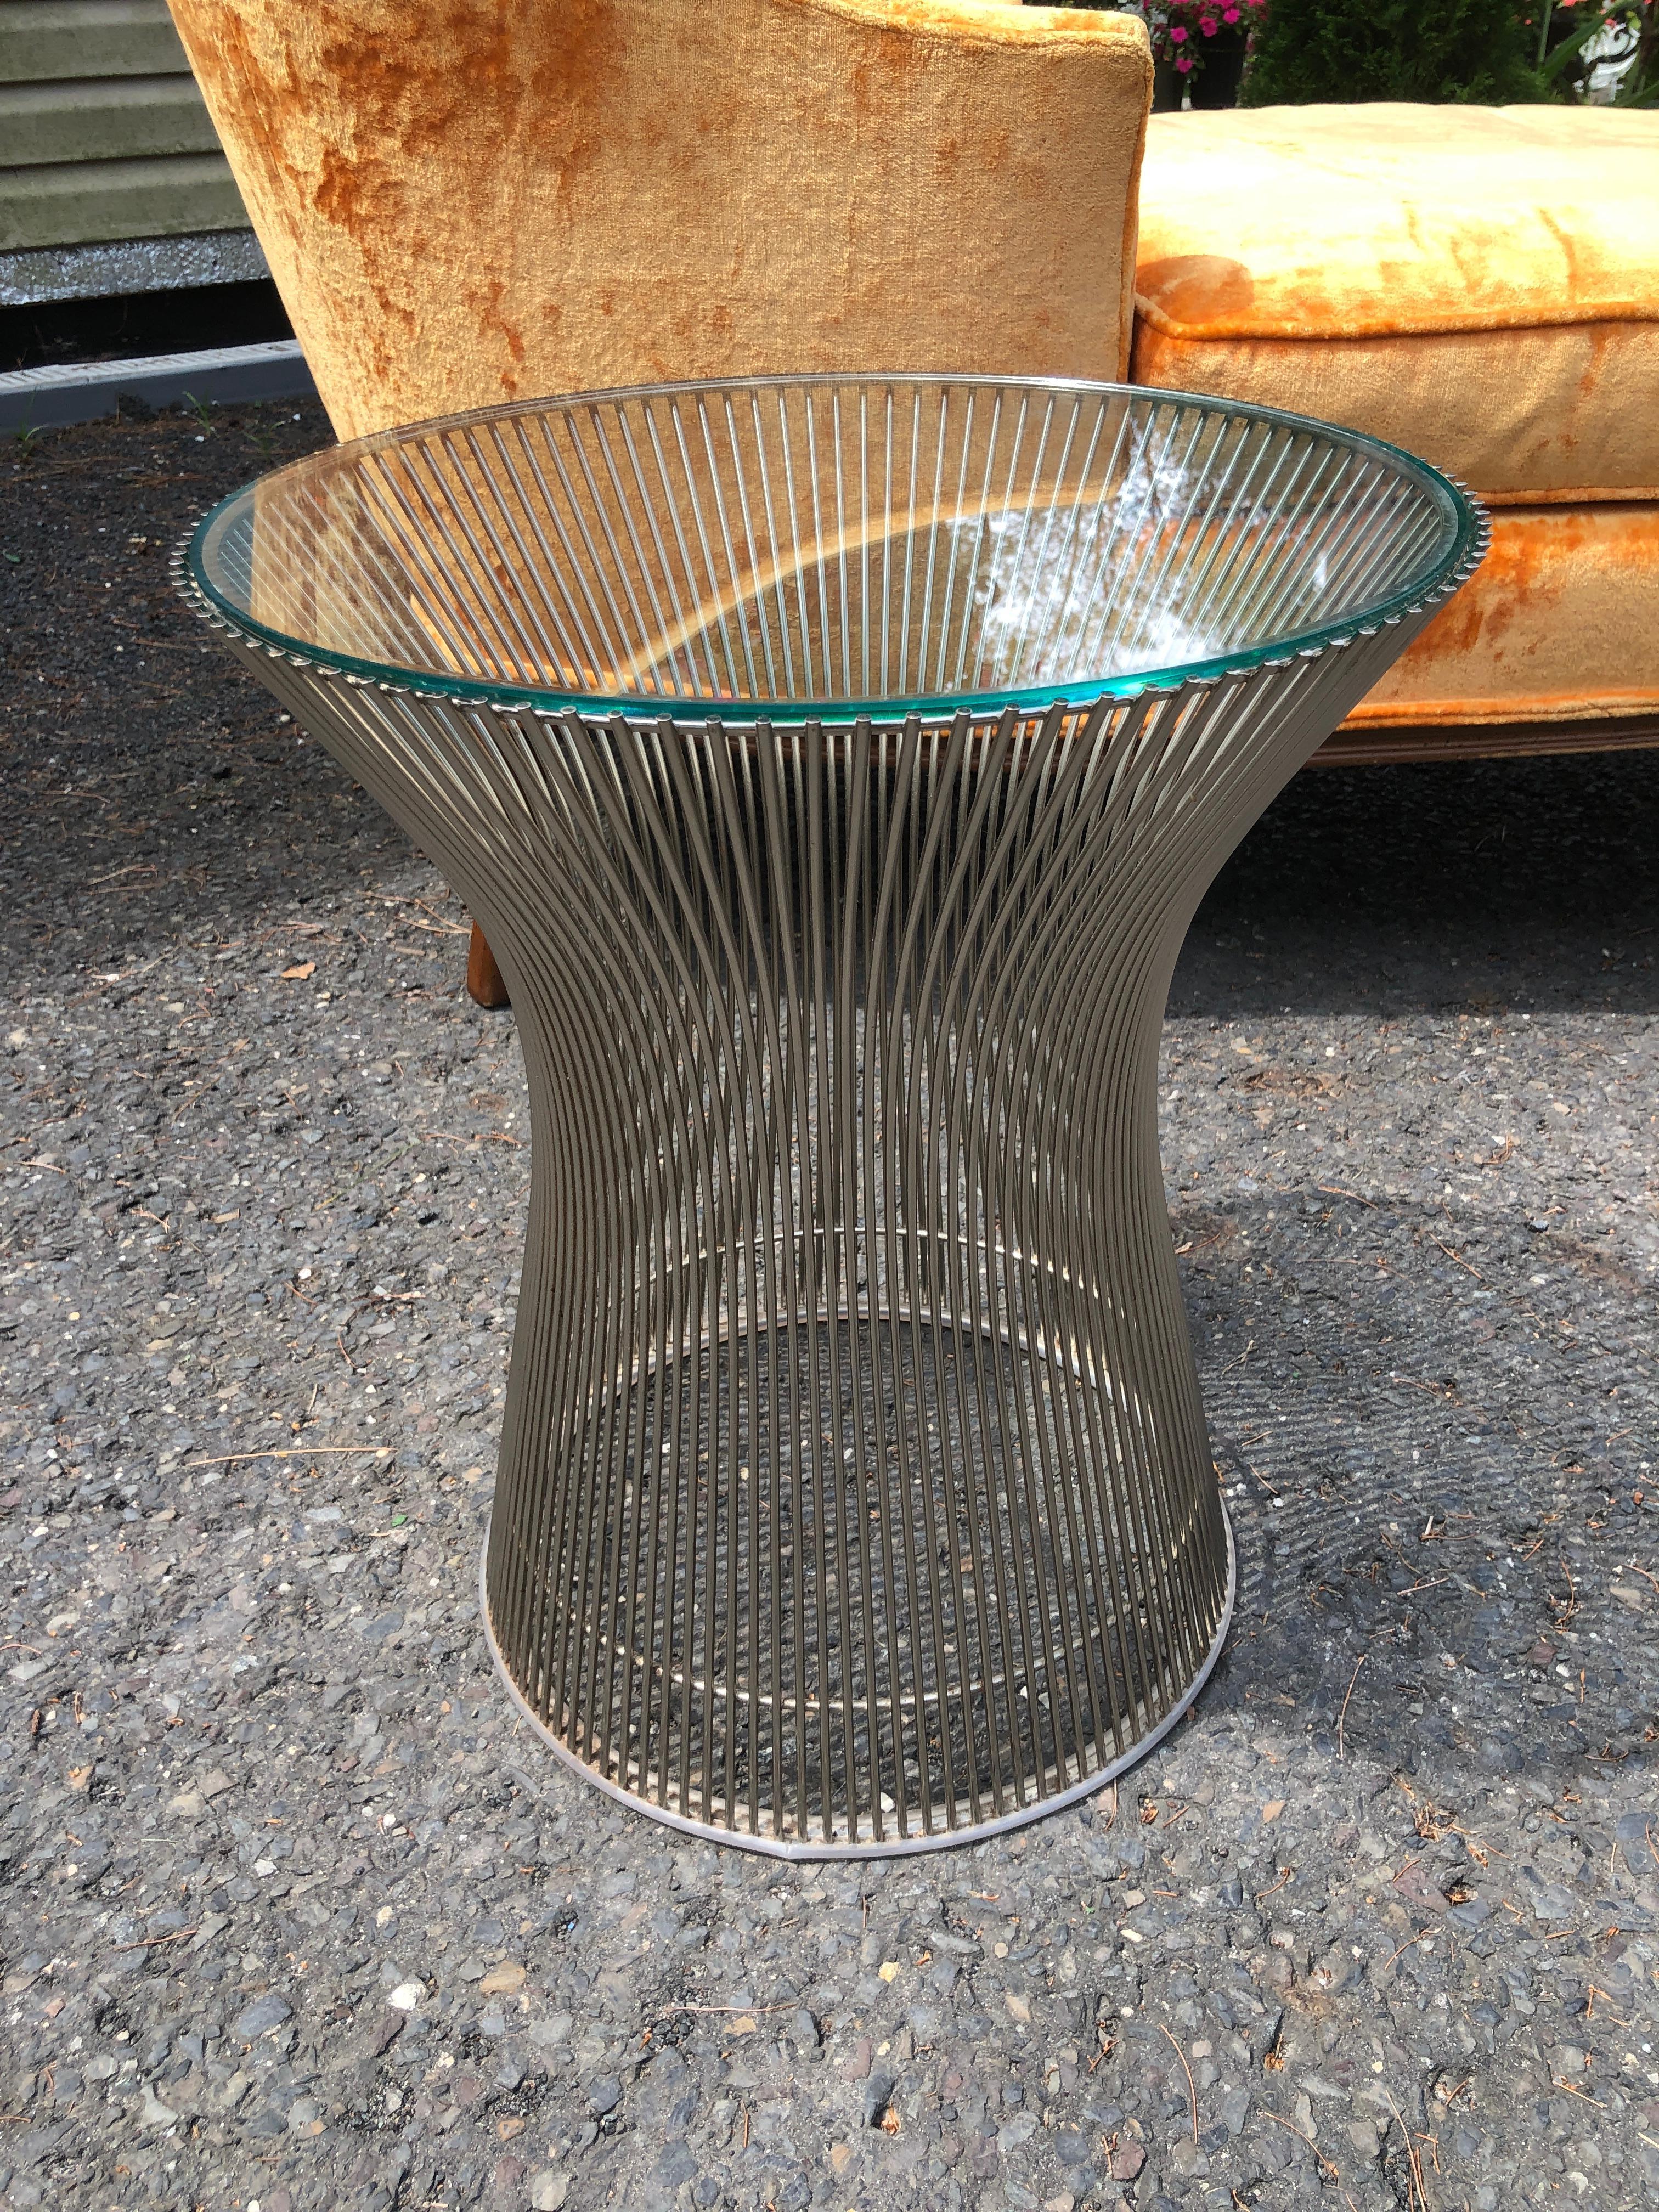 Fabulous Warren Platner for Knoll International, side table, glass, metal, circa 1960s

This iconic side table by Warren Platner is created by welding curved steel rods to circular and semi-circular frames, simultaneously serving as structure and